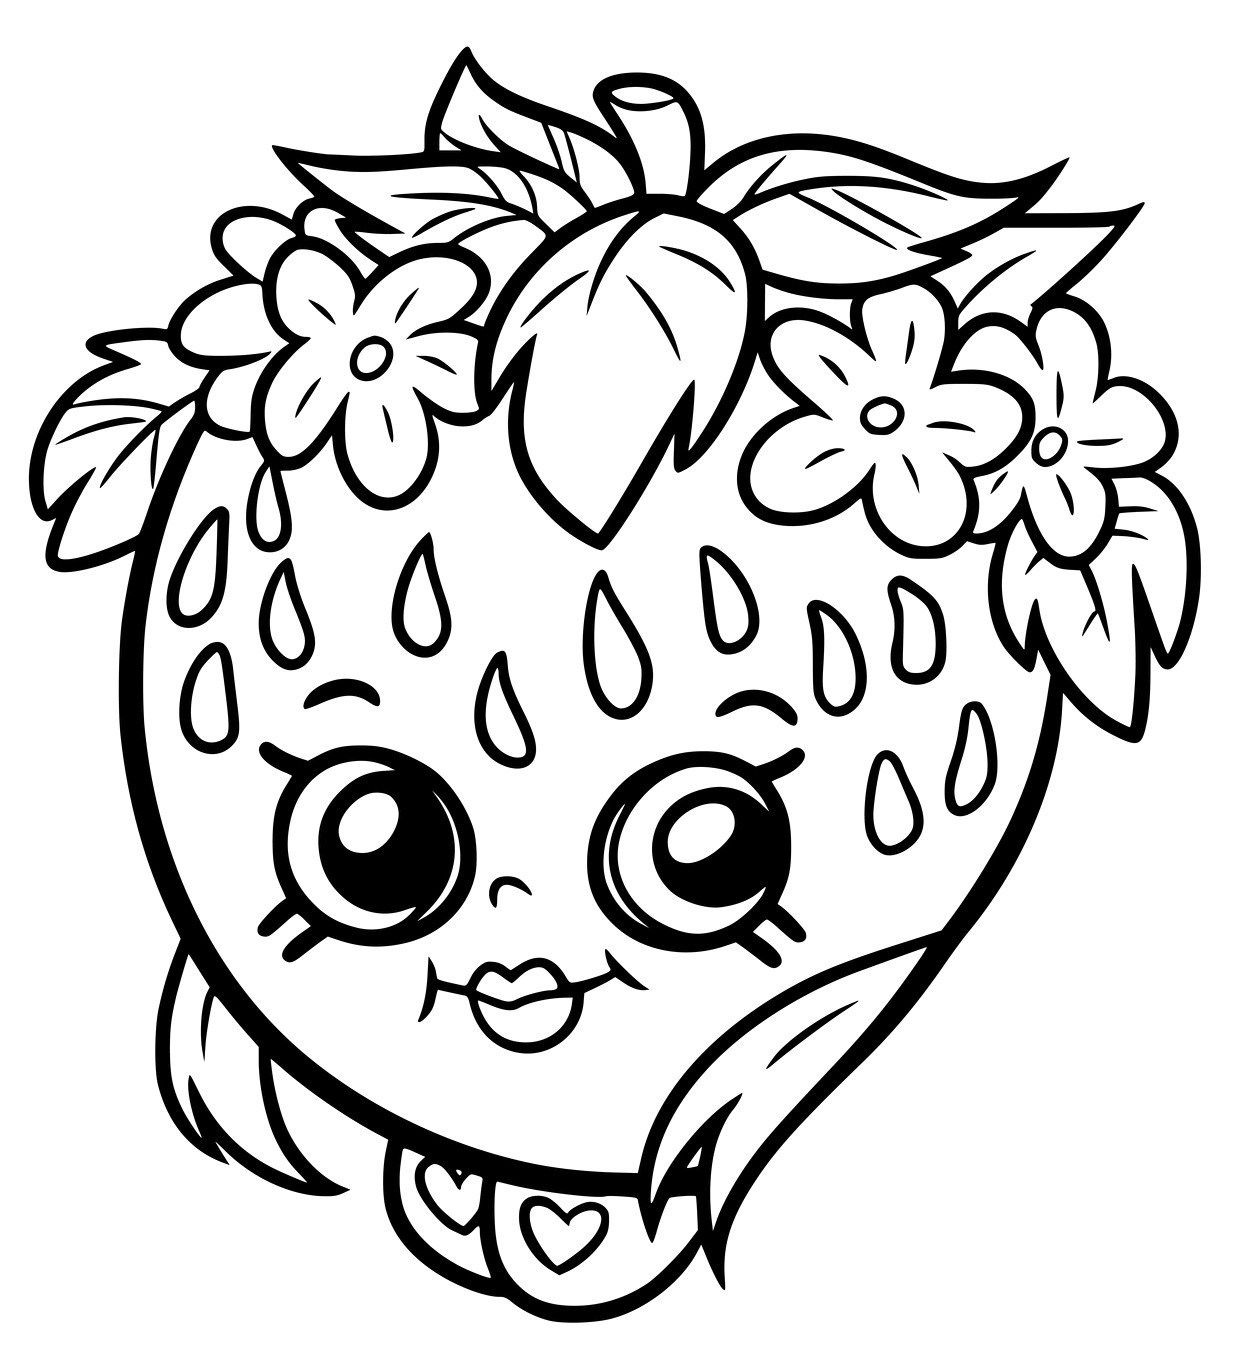 Free shopkins coloring pages extravagant free shopkins coloring pages printable for kids to